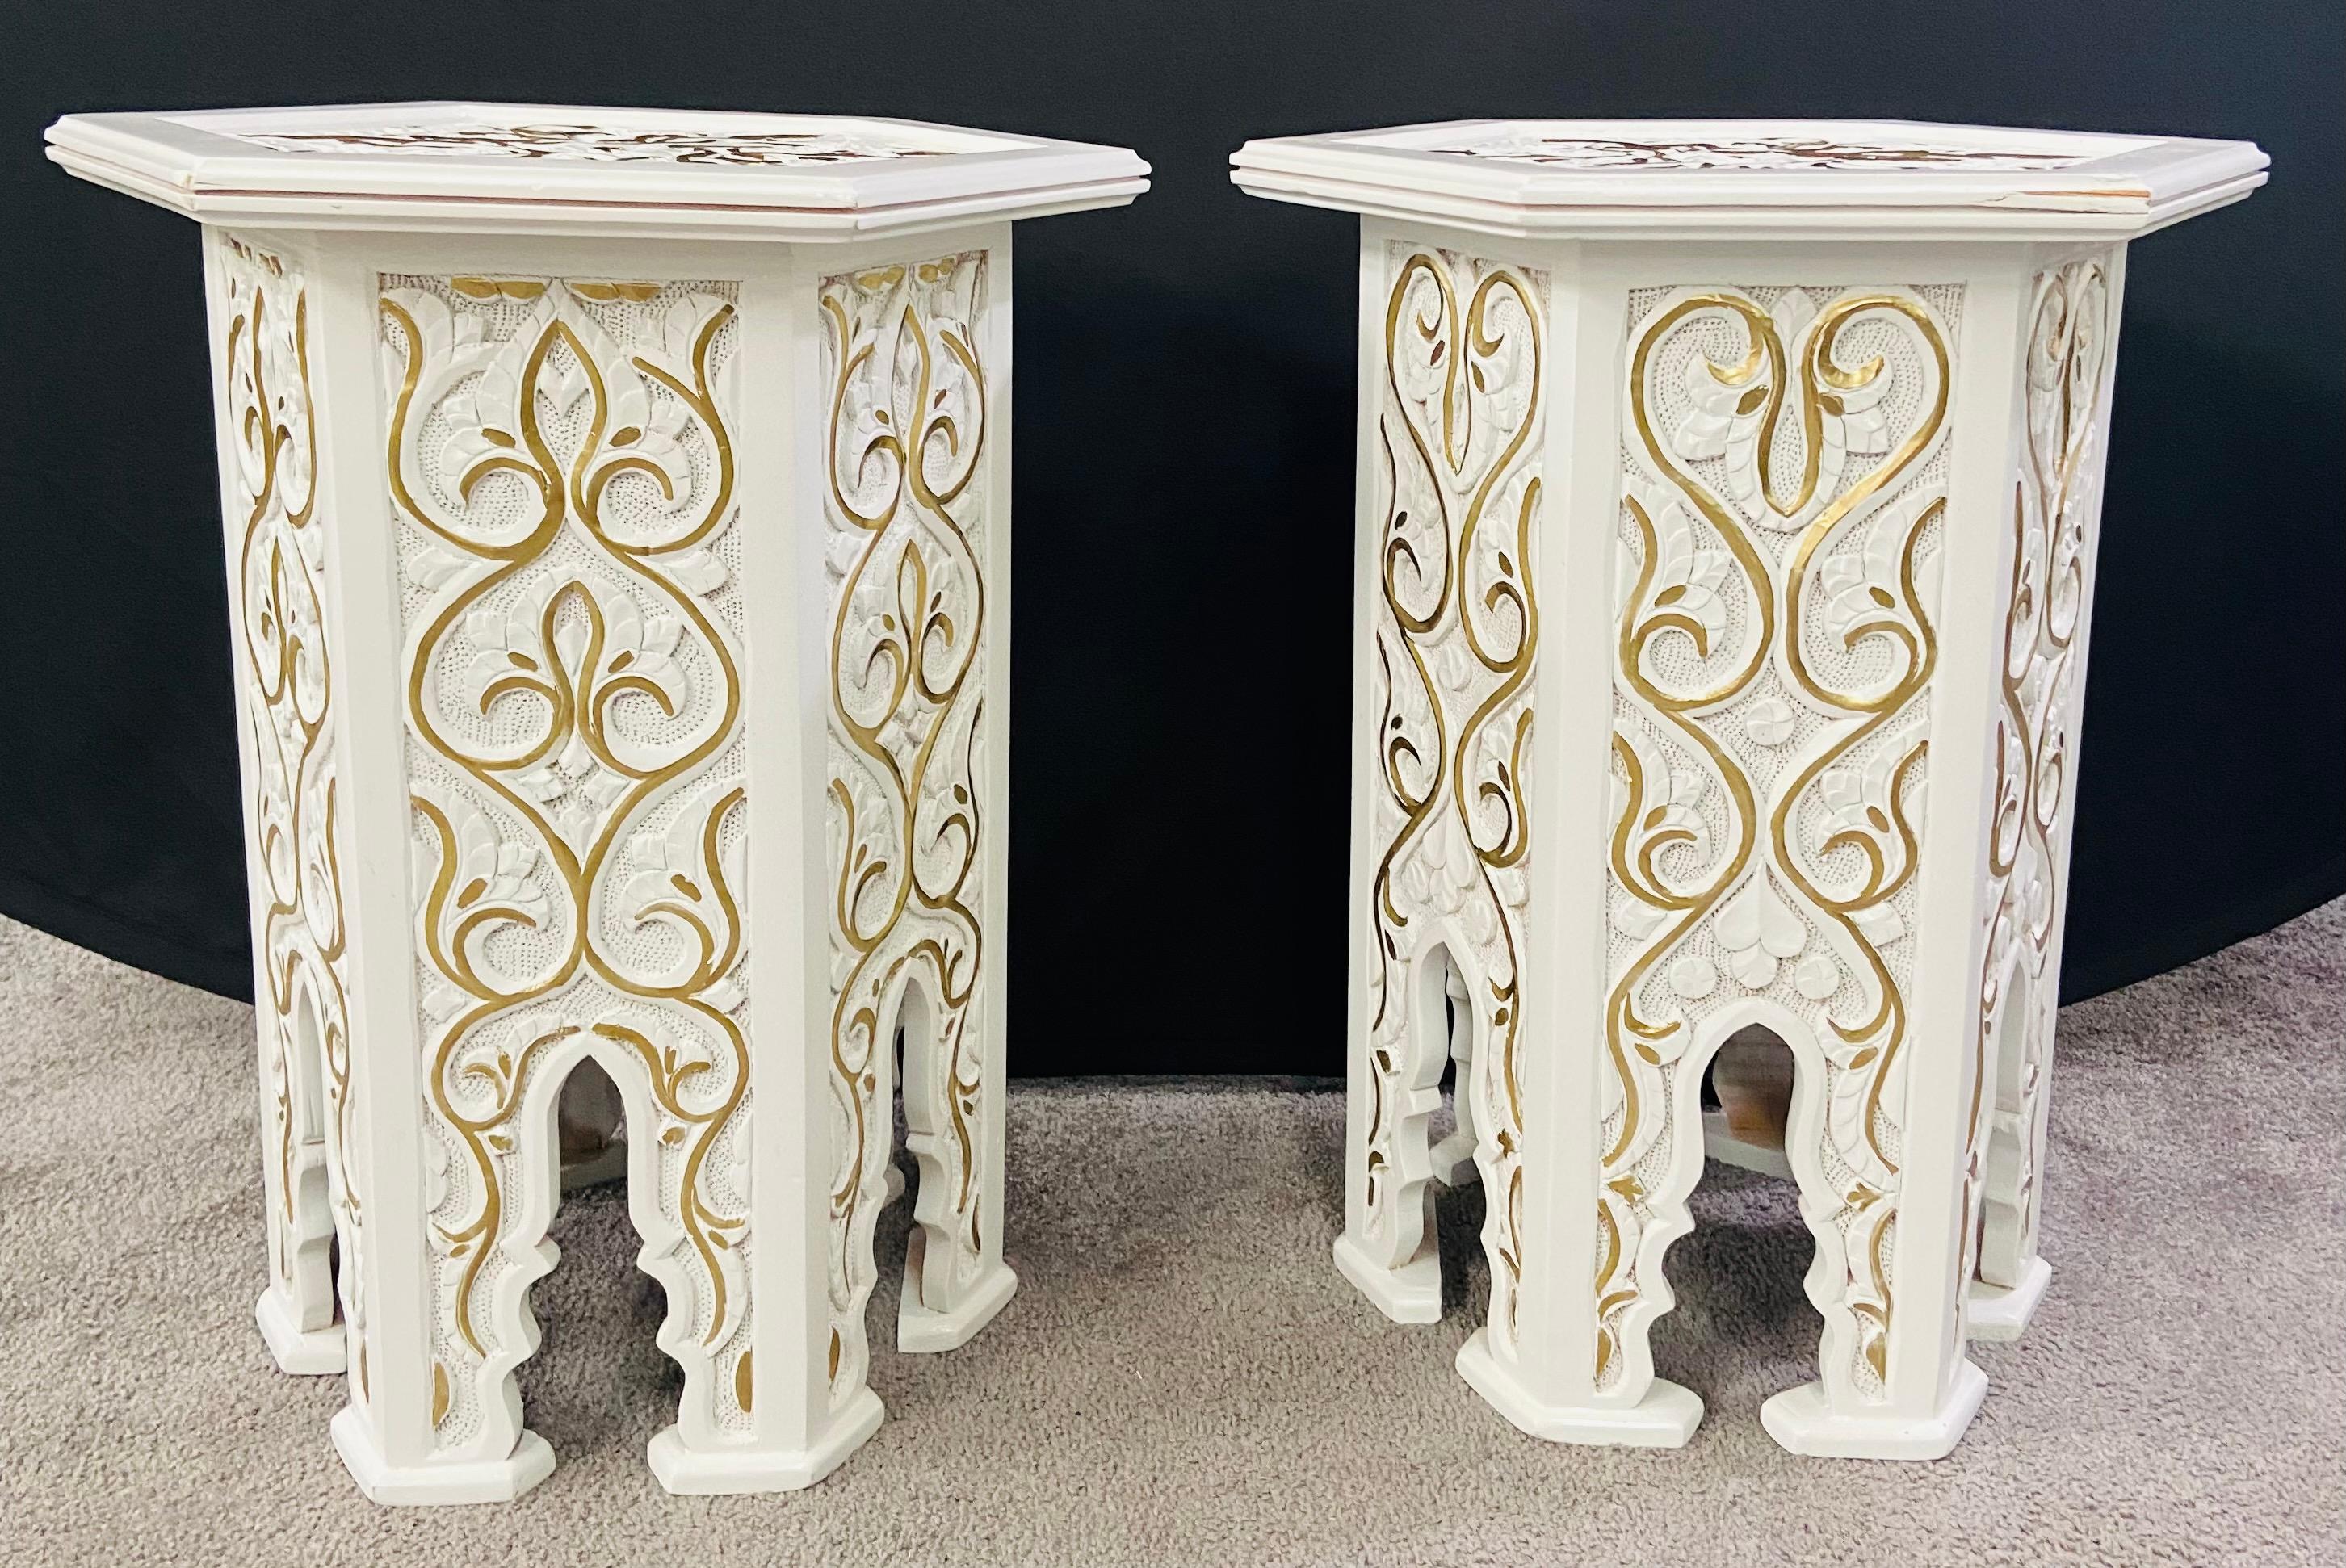 An exquisite pair of Hollywood Regency Moroccan style side or end table featuring an hexagonal shape. The handmade tables are finely painted in white and decorated in leaves Pattern painted in gold and beautiful arches, a staple of the moorish